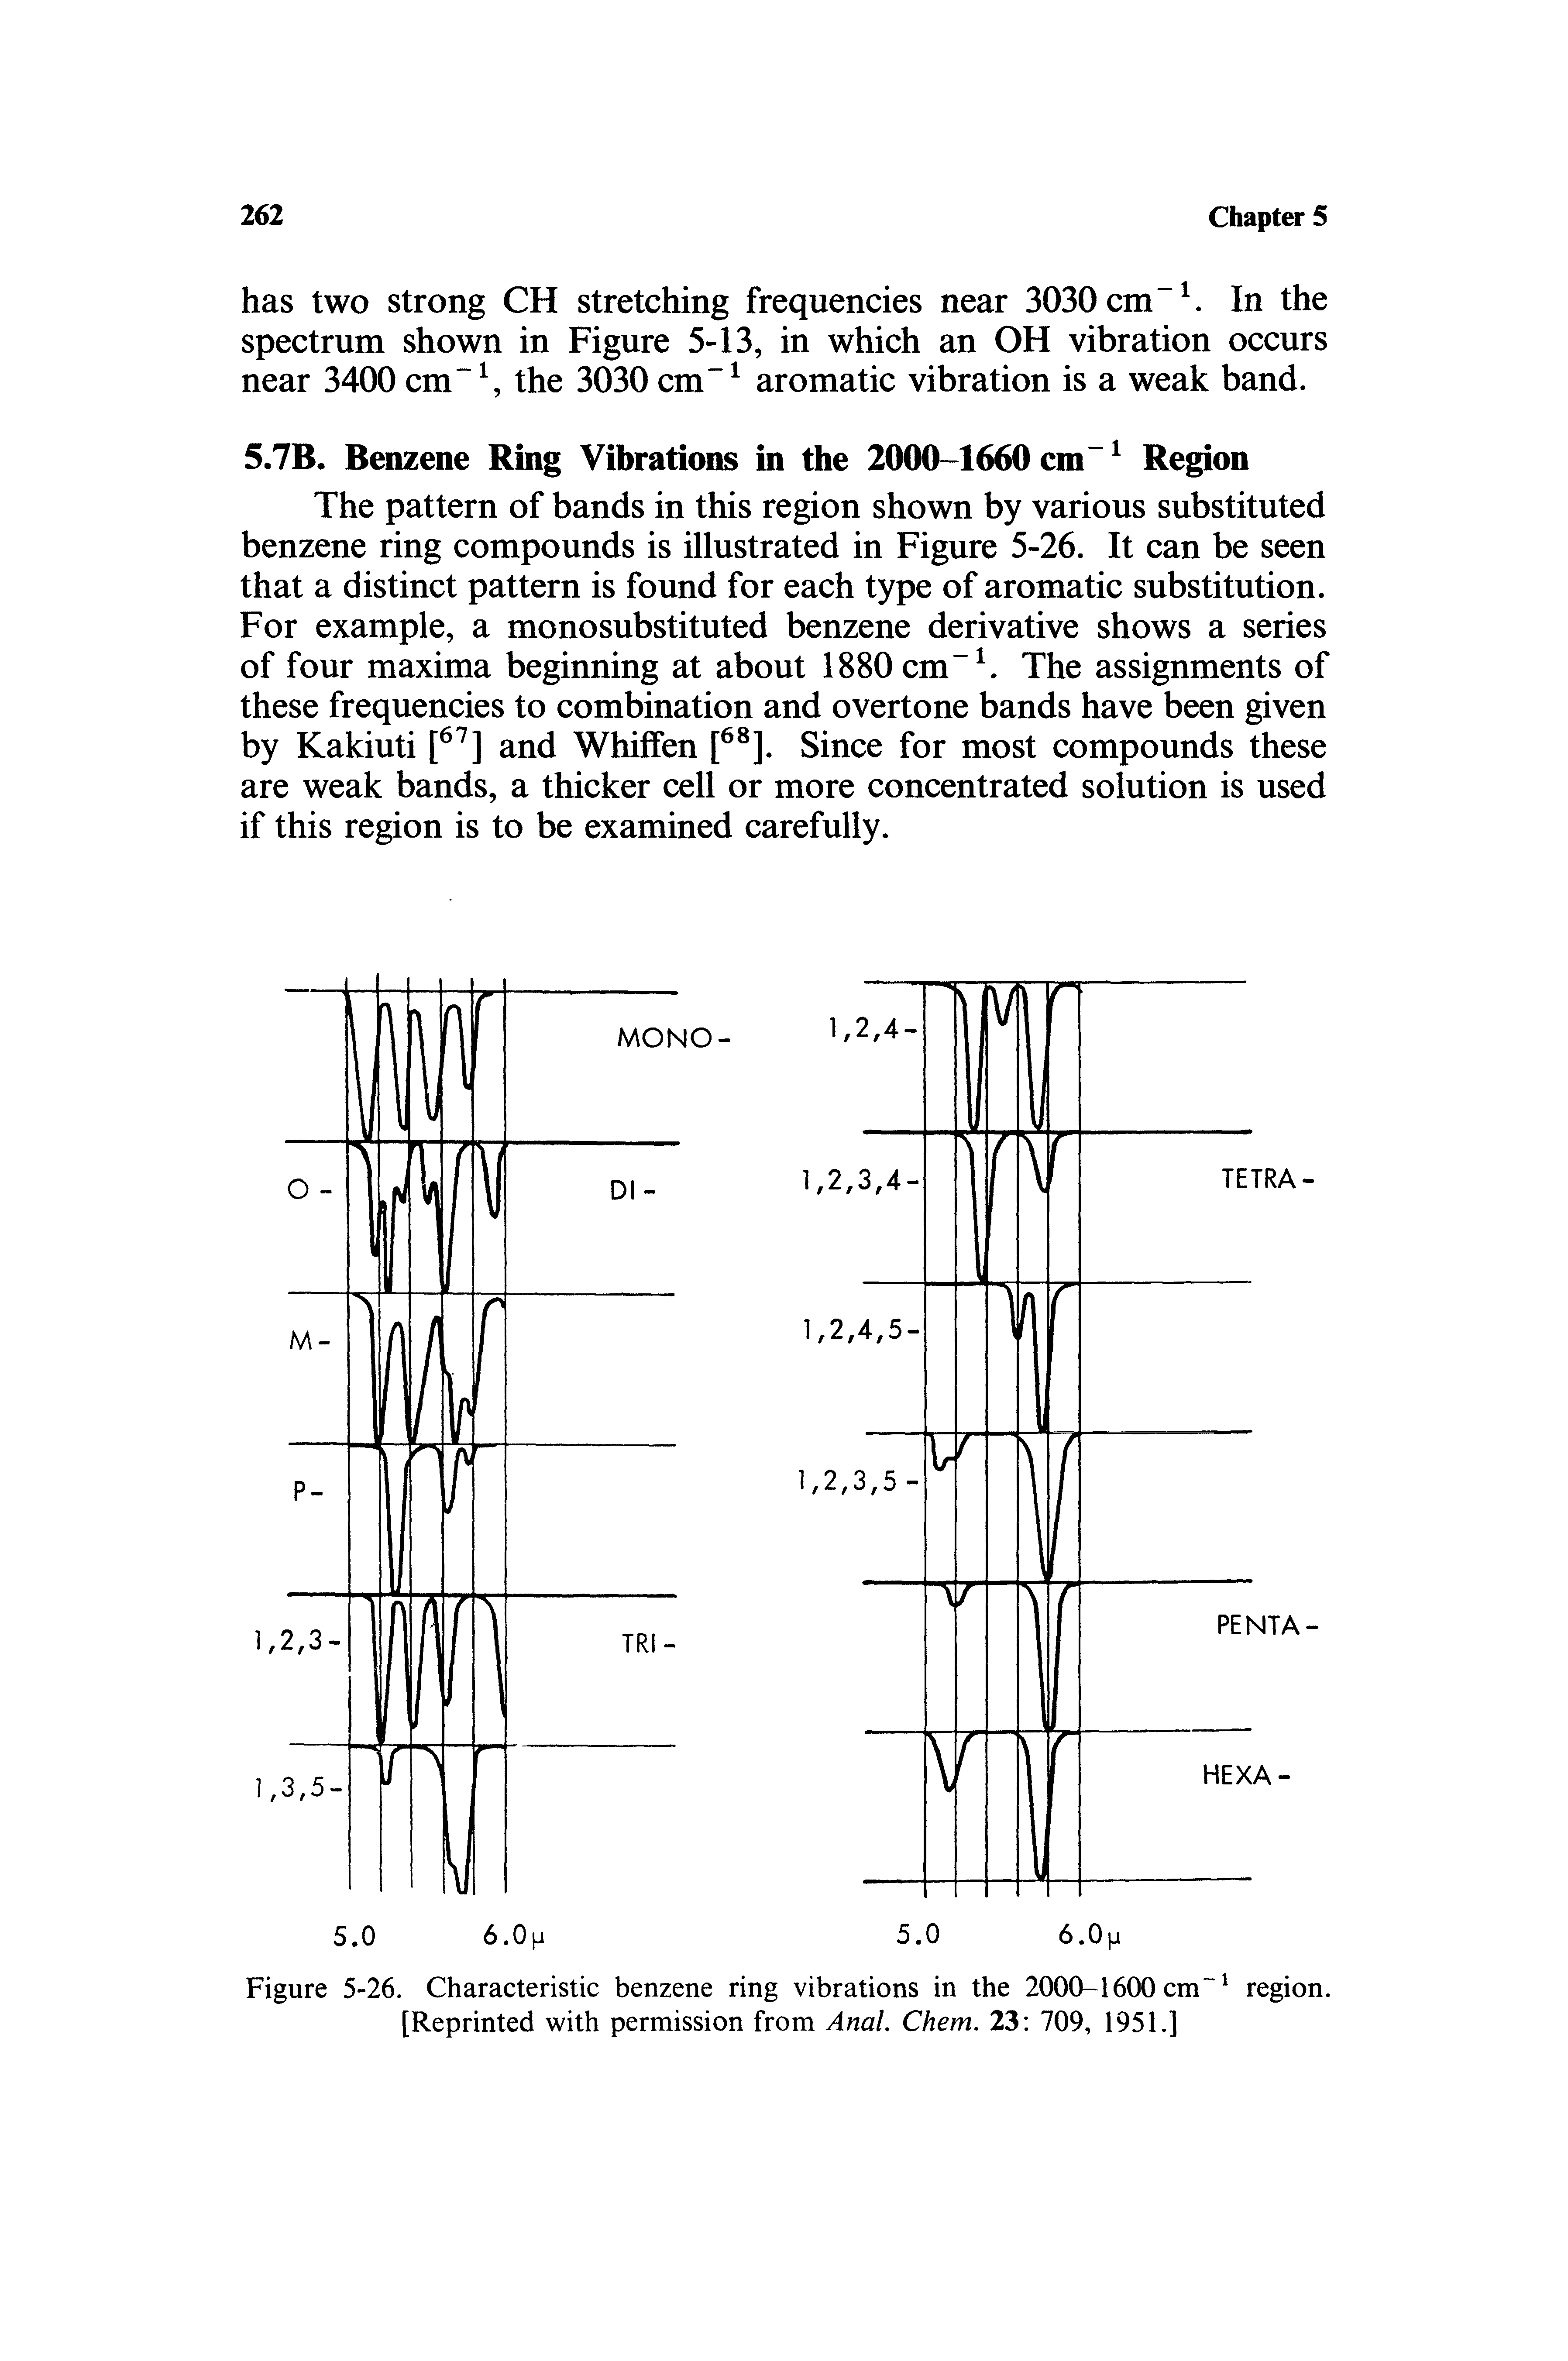 Figure 5-26. Characteristic benzene ring vibrations in the 2000-1600 cm region. [Reprinted with permission from Anal. Chem. 23 709, 1951.]...